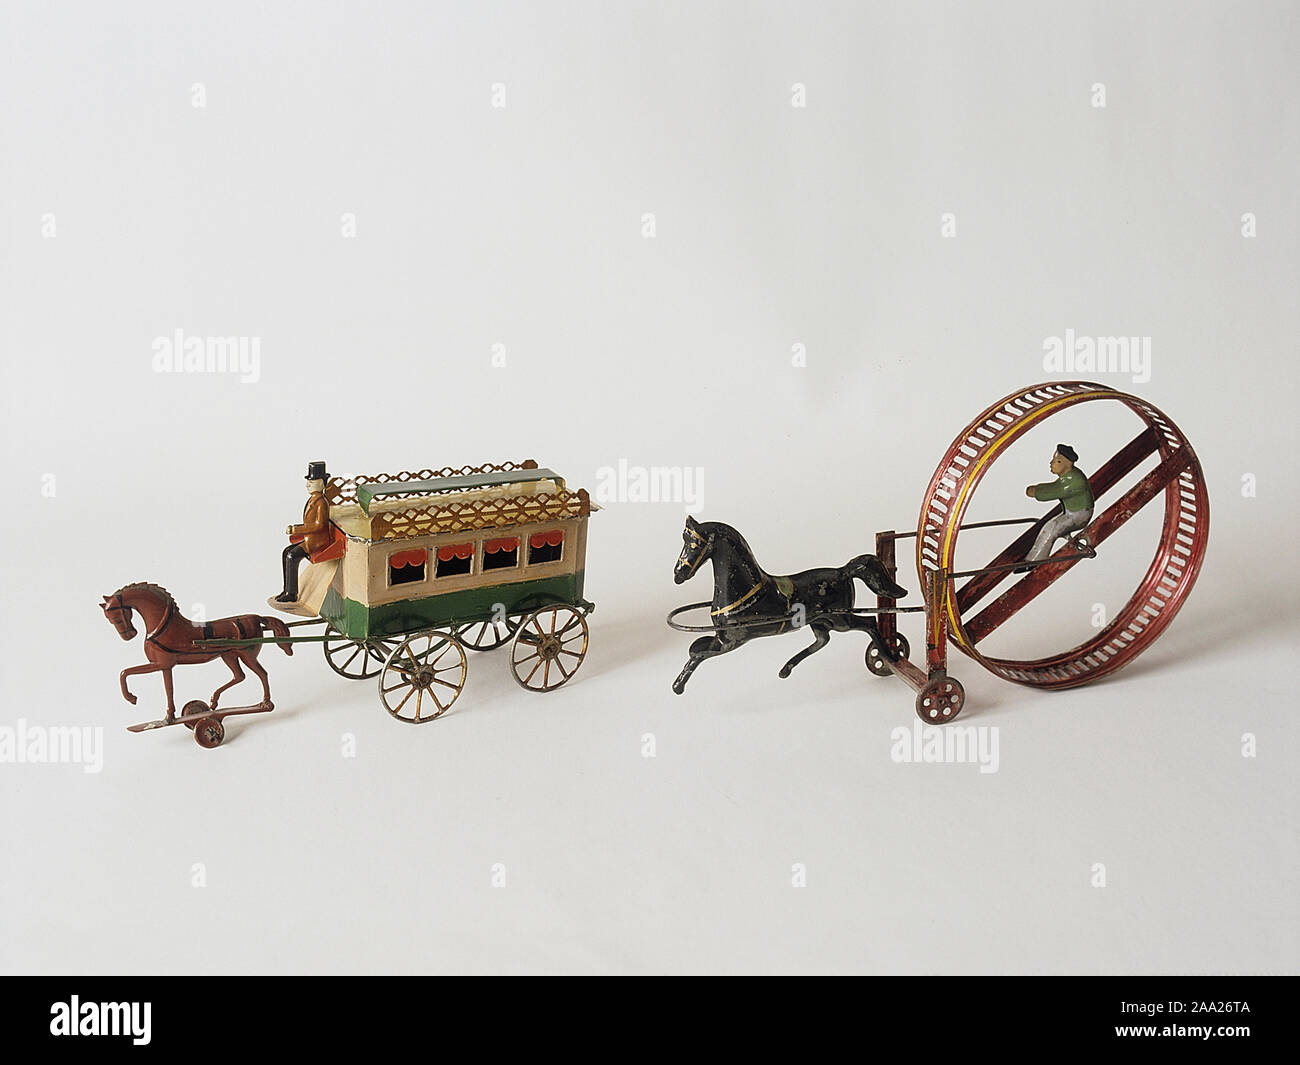 Childrens toys from the past. Two tin toys that were popular around the turn of the century 1800-1900. Simple but fun toys that were cheap to buy. They are now collectible and can be very valuable. Stock Photo